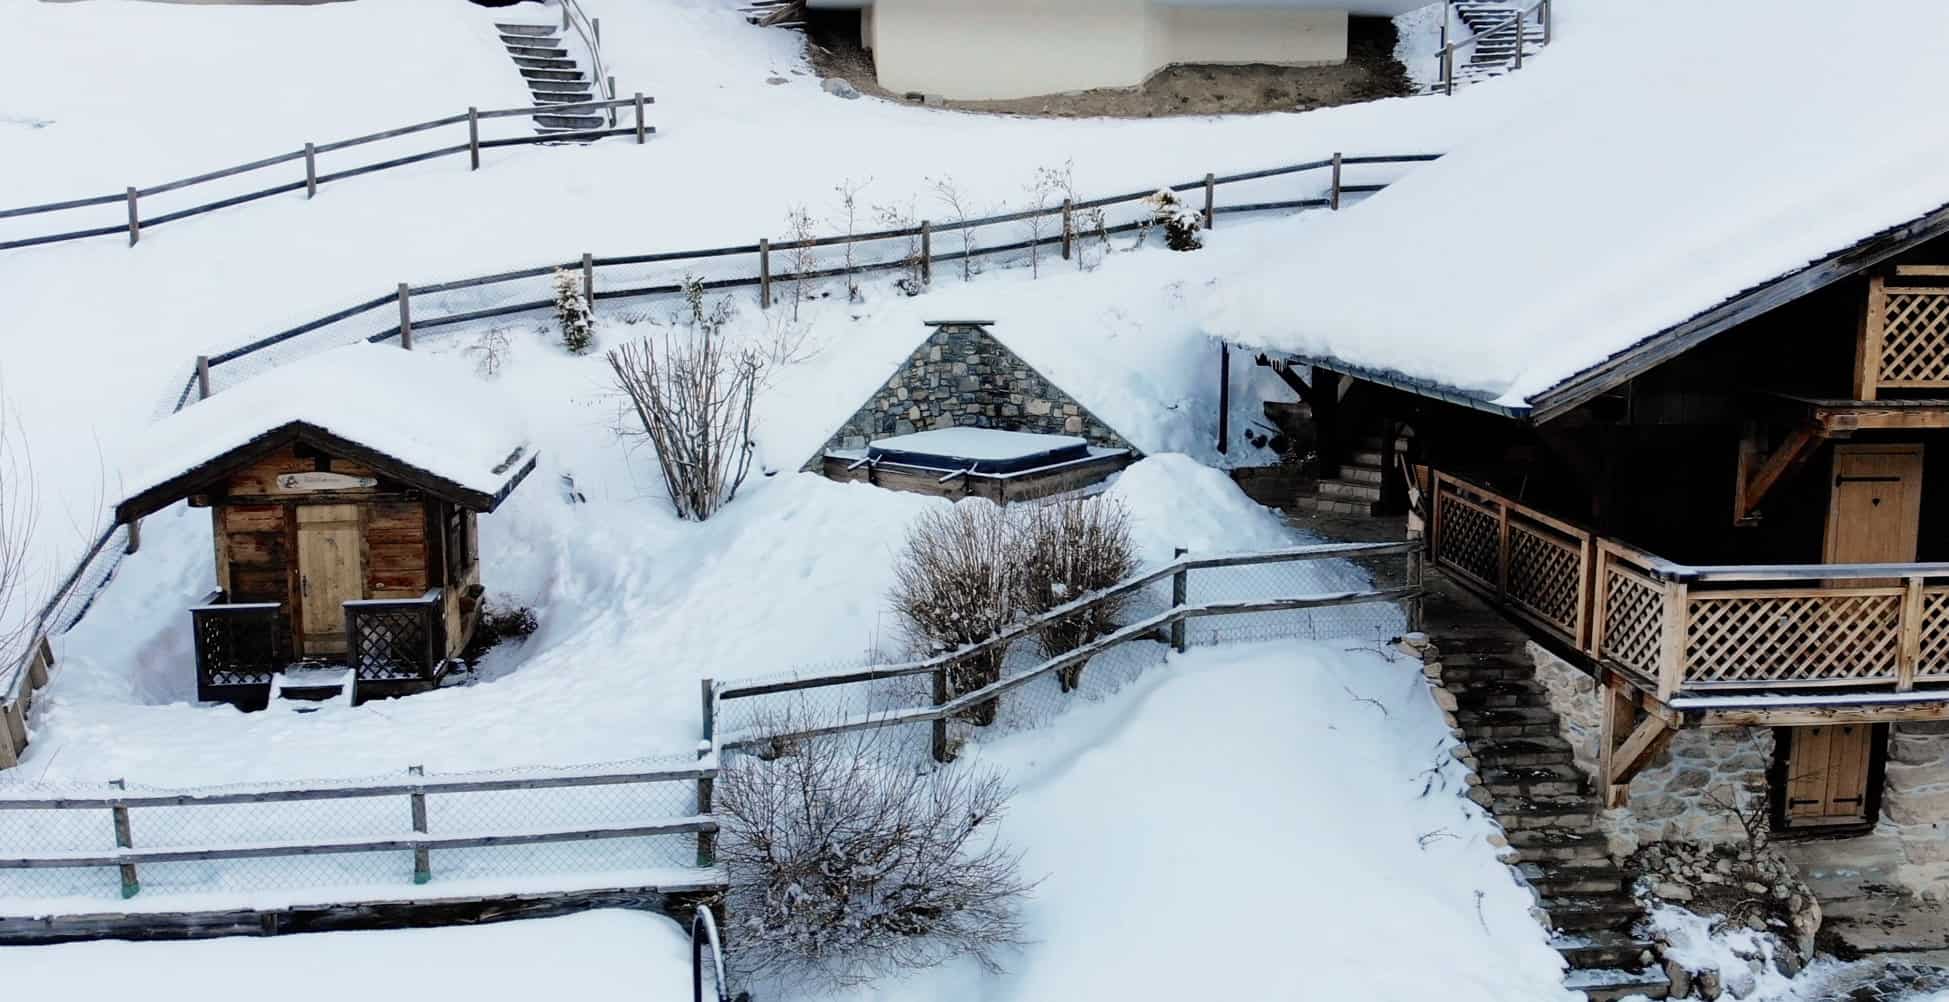 an aerial view of the clarian chalets hot tub in winter in the snow